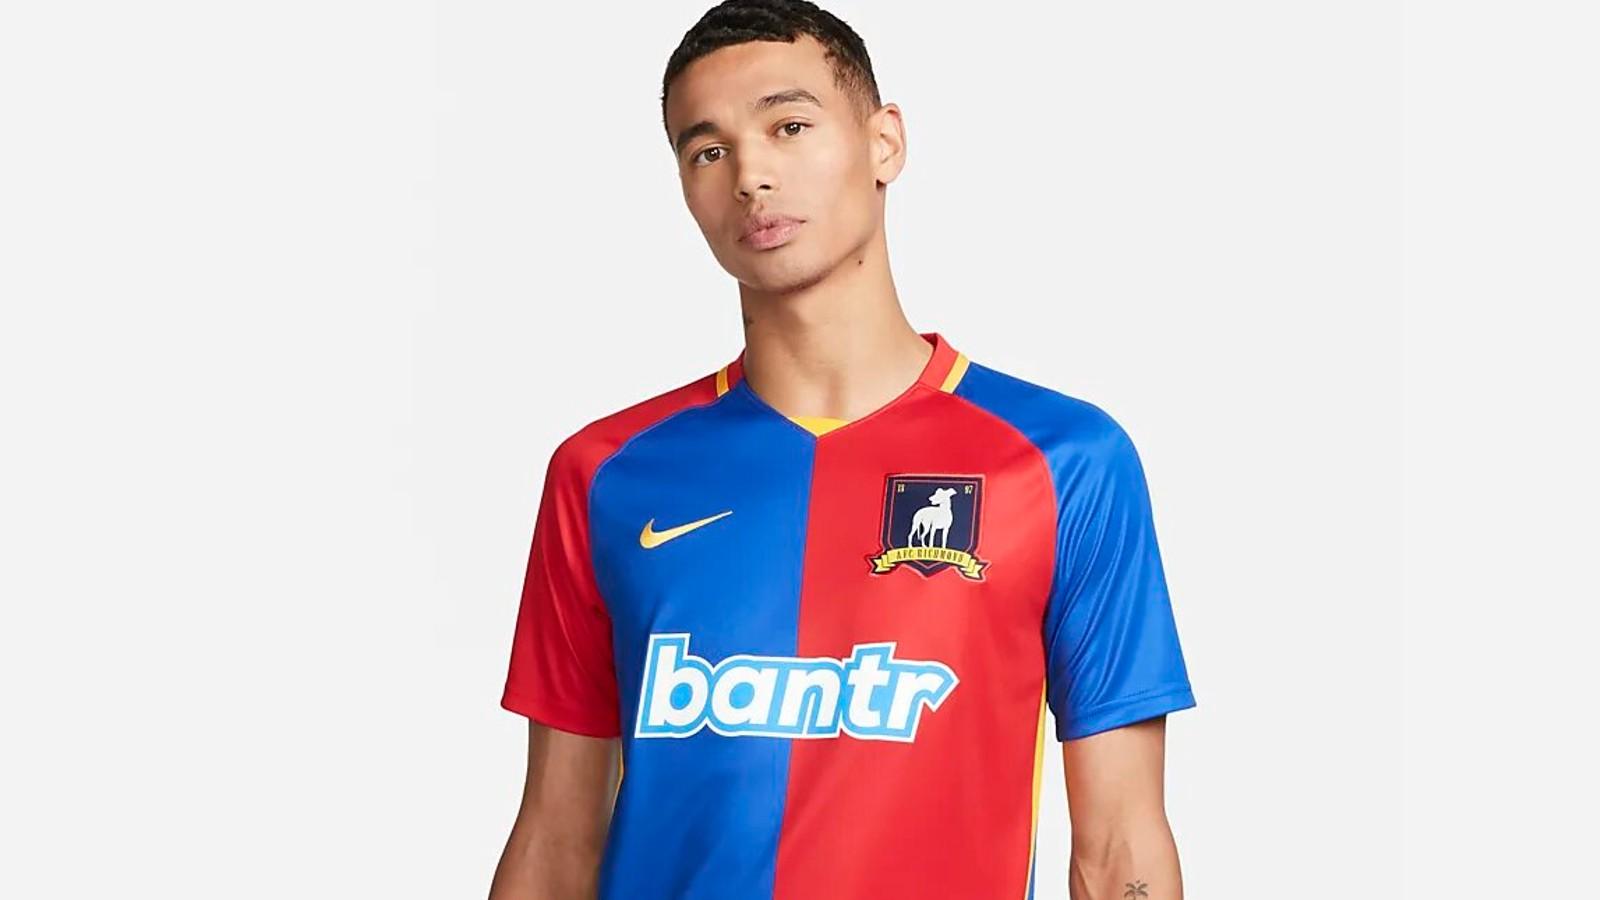 The official Nike AFC Richmond shirt in its Ted Lasso merchandise collection